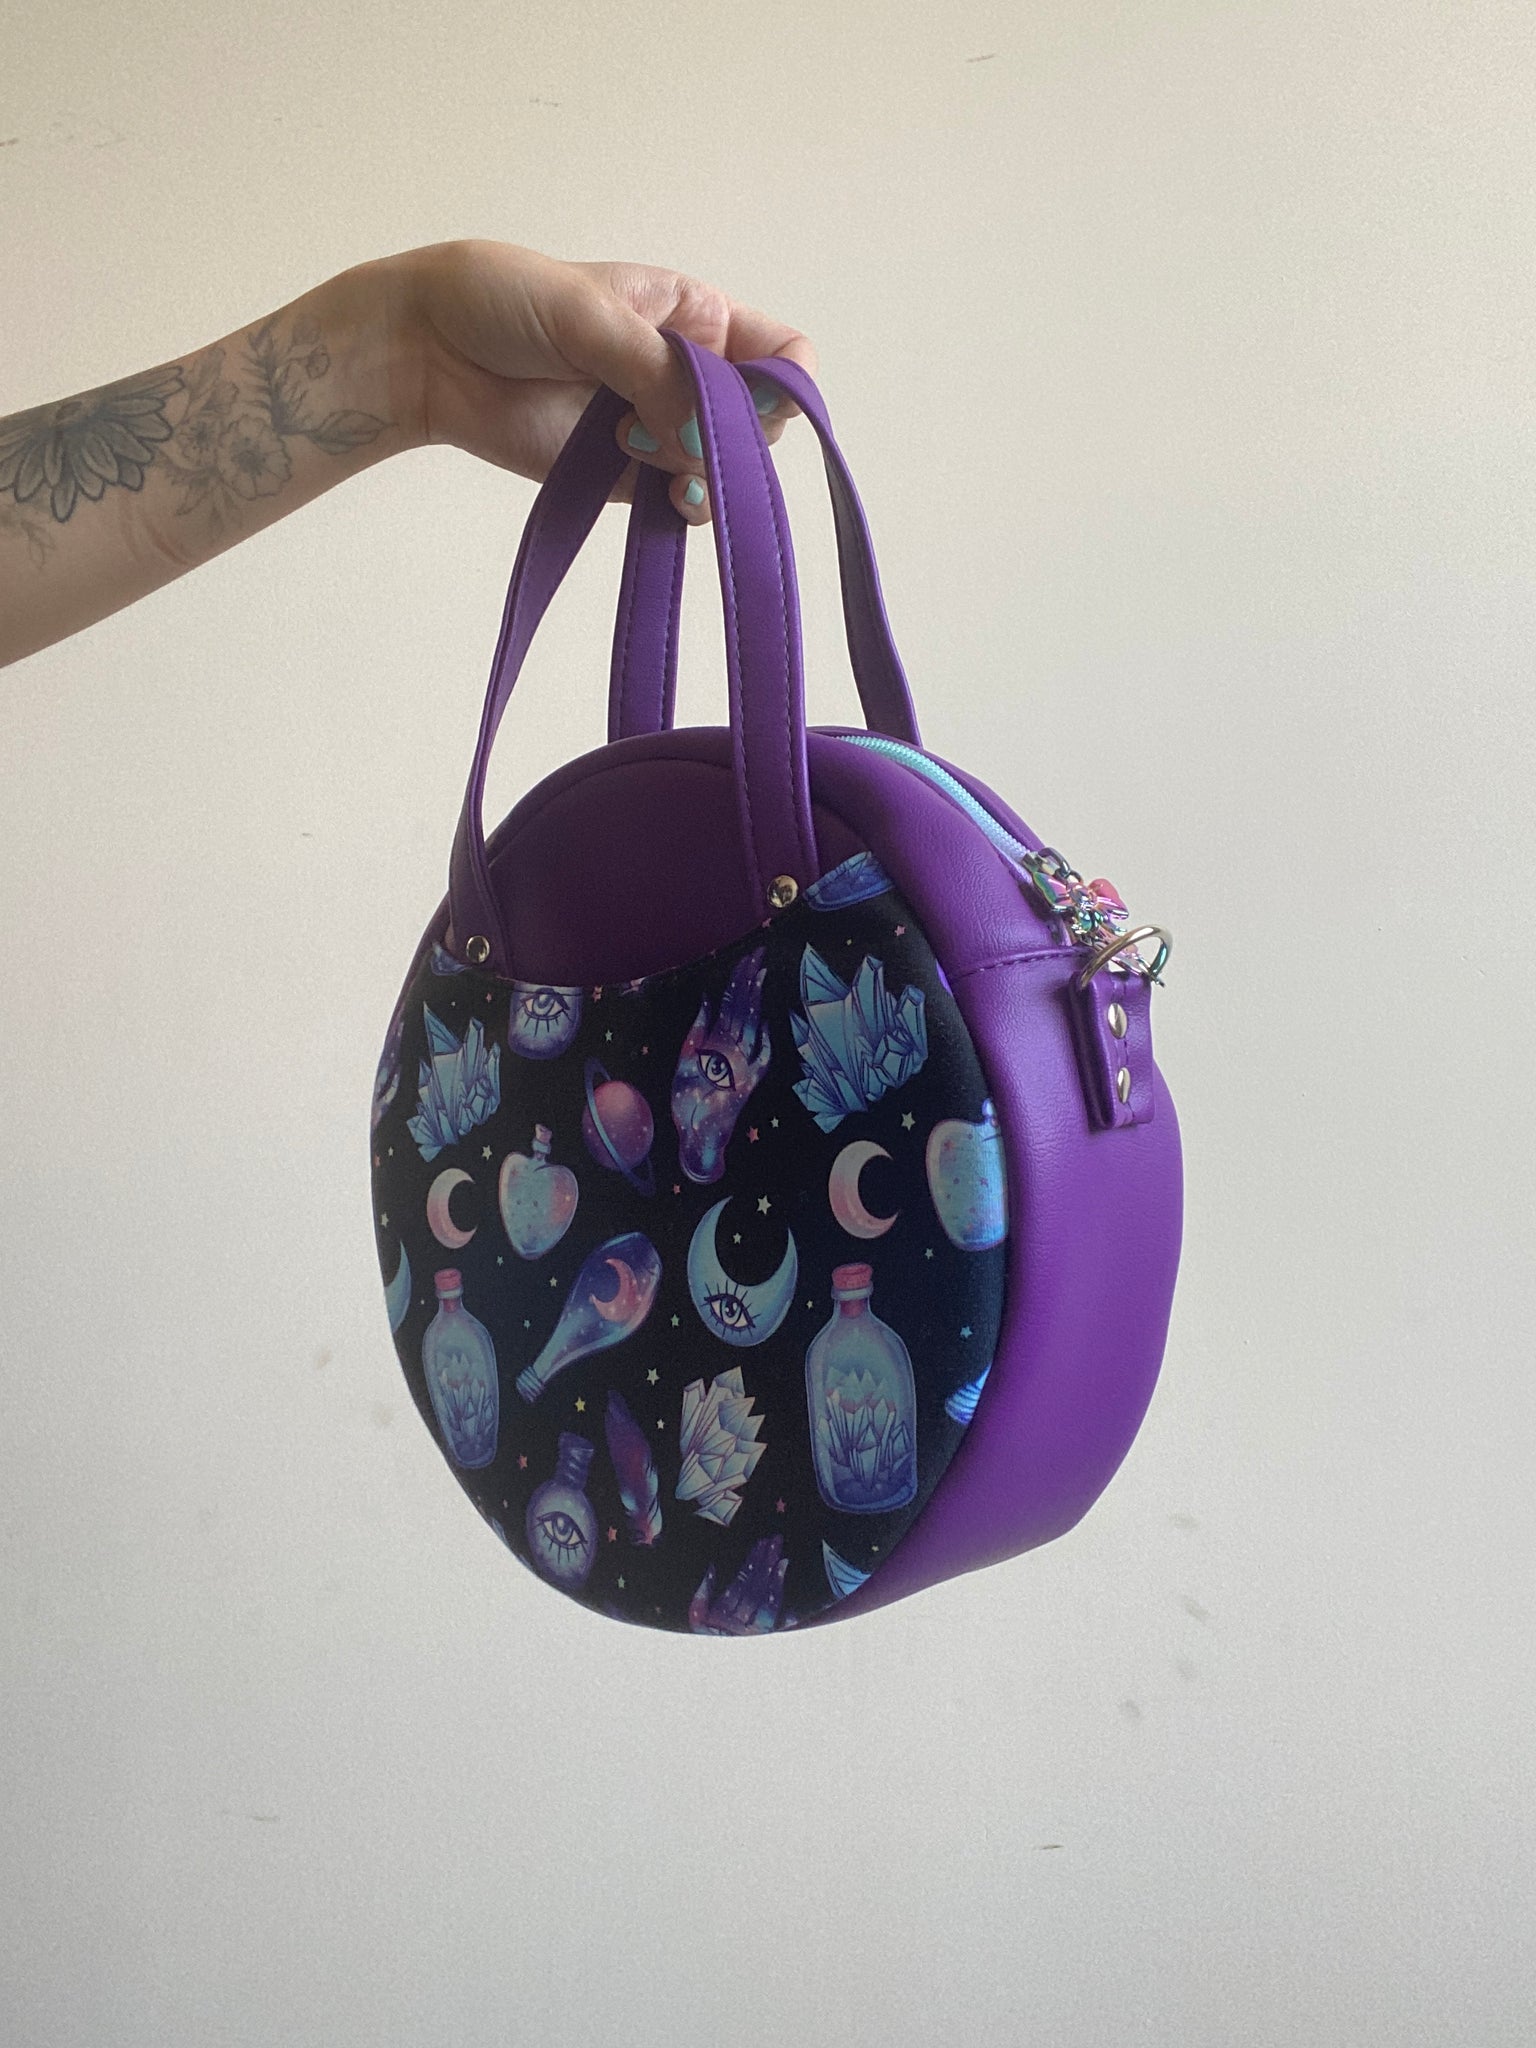 Custom Made Purple and Blue Witchy Print Round Shoulder Bag